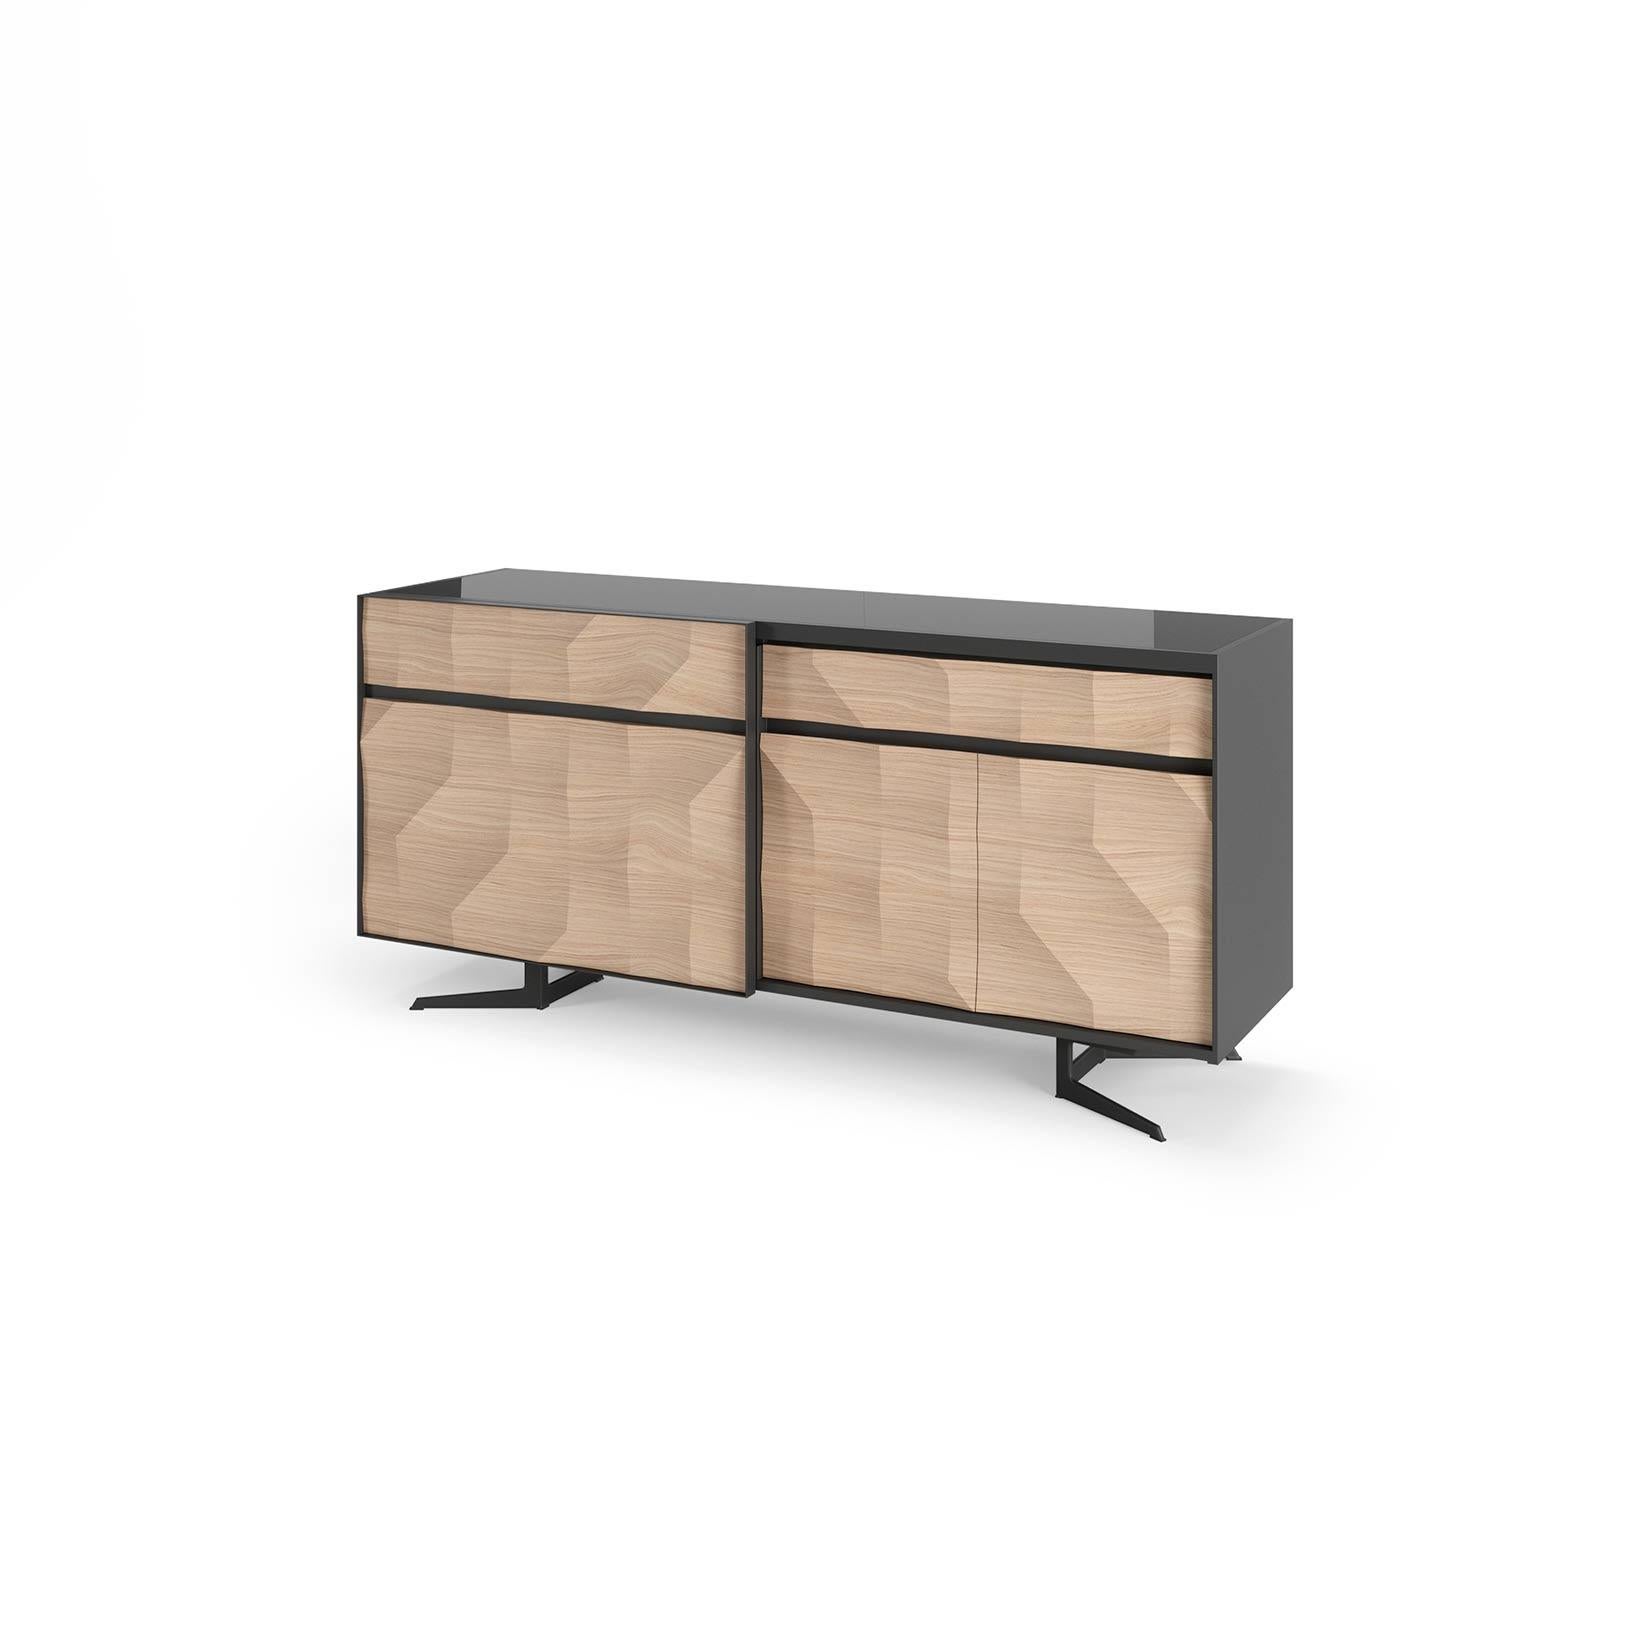 185cm MonteCarlo Sideboard w/ 3 Doors and 1 Drawer w/ Glass Top.

The MonteCarlo collection stands out for its modern and sober look, through the combination of soft and neutral colors that transmit the feeling of comfort, as well as the presence of